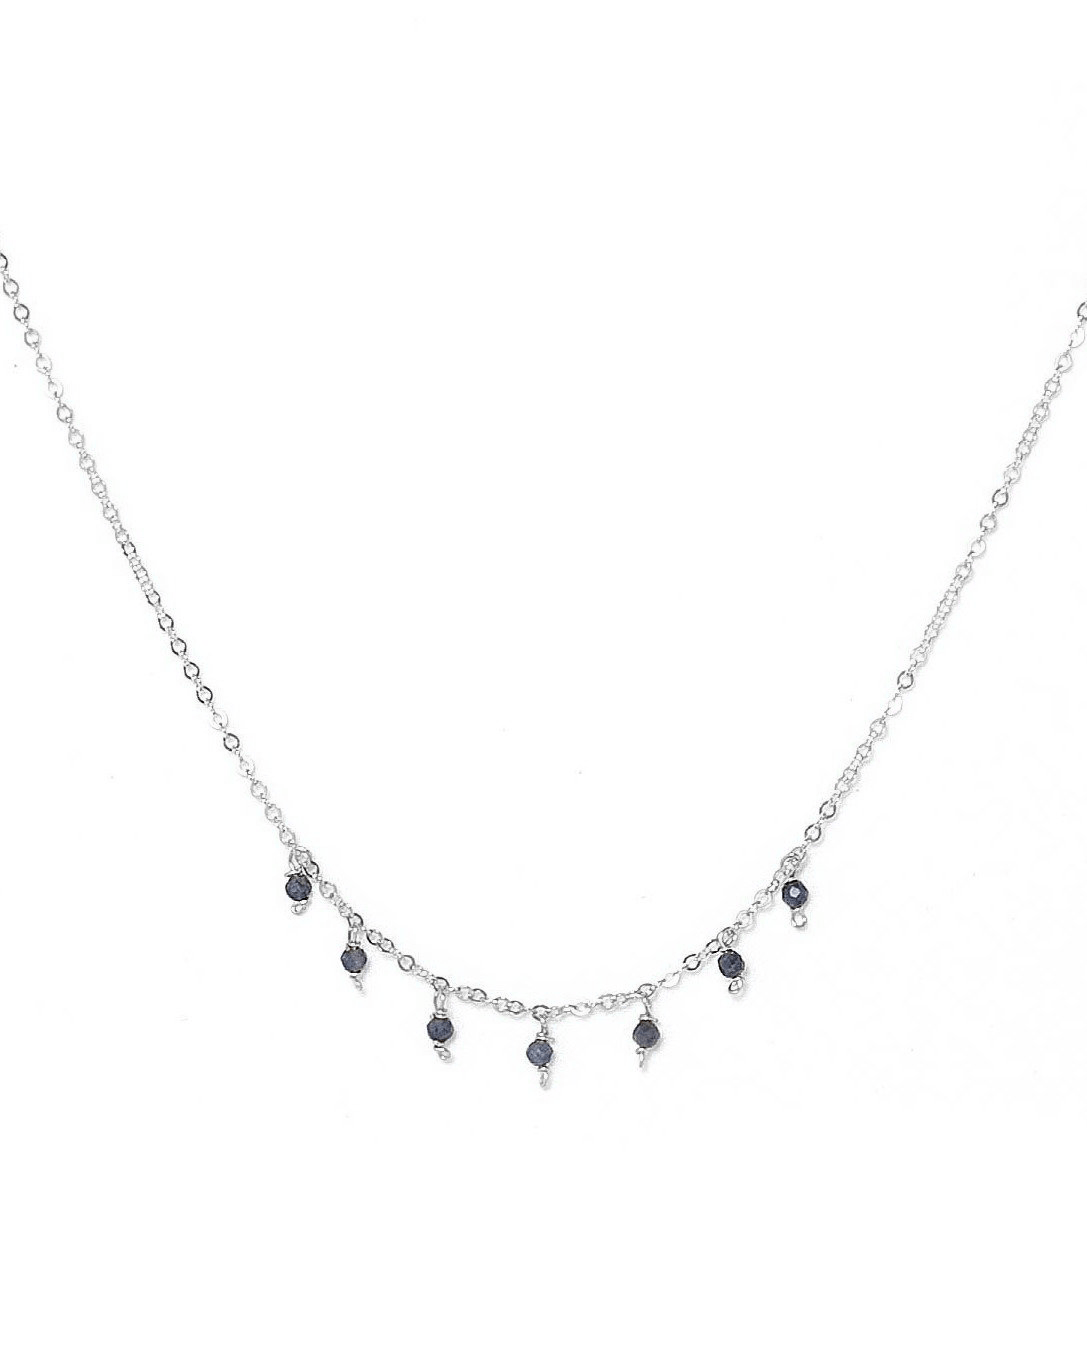 Cuy Necklace by KOZAKH. A 16 to 18 inch adjustable length necklace in Sterling Silver, featuring 2mm faceted round Sapphire gems.